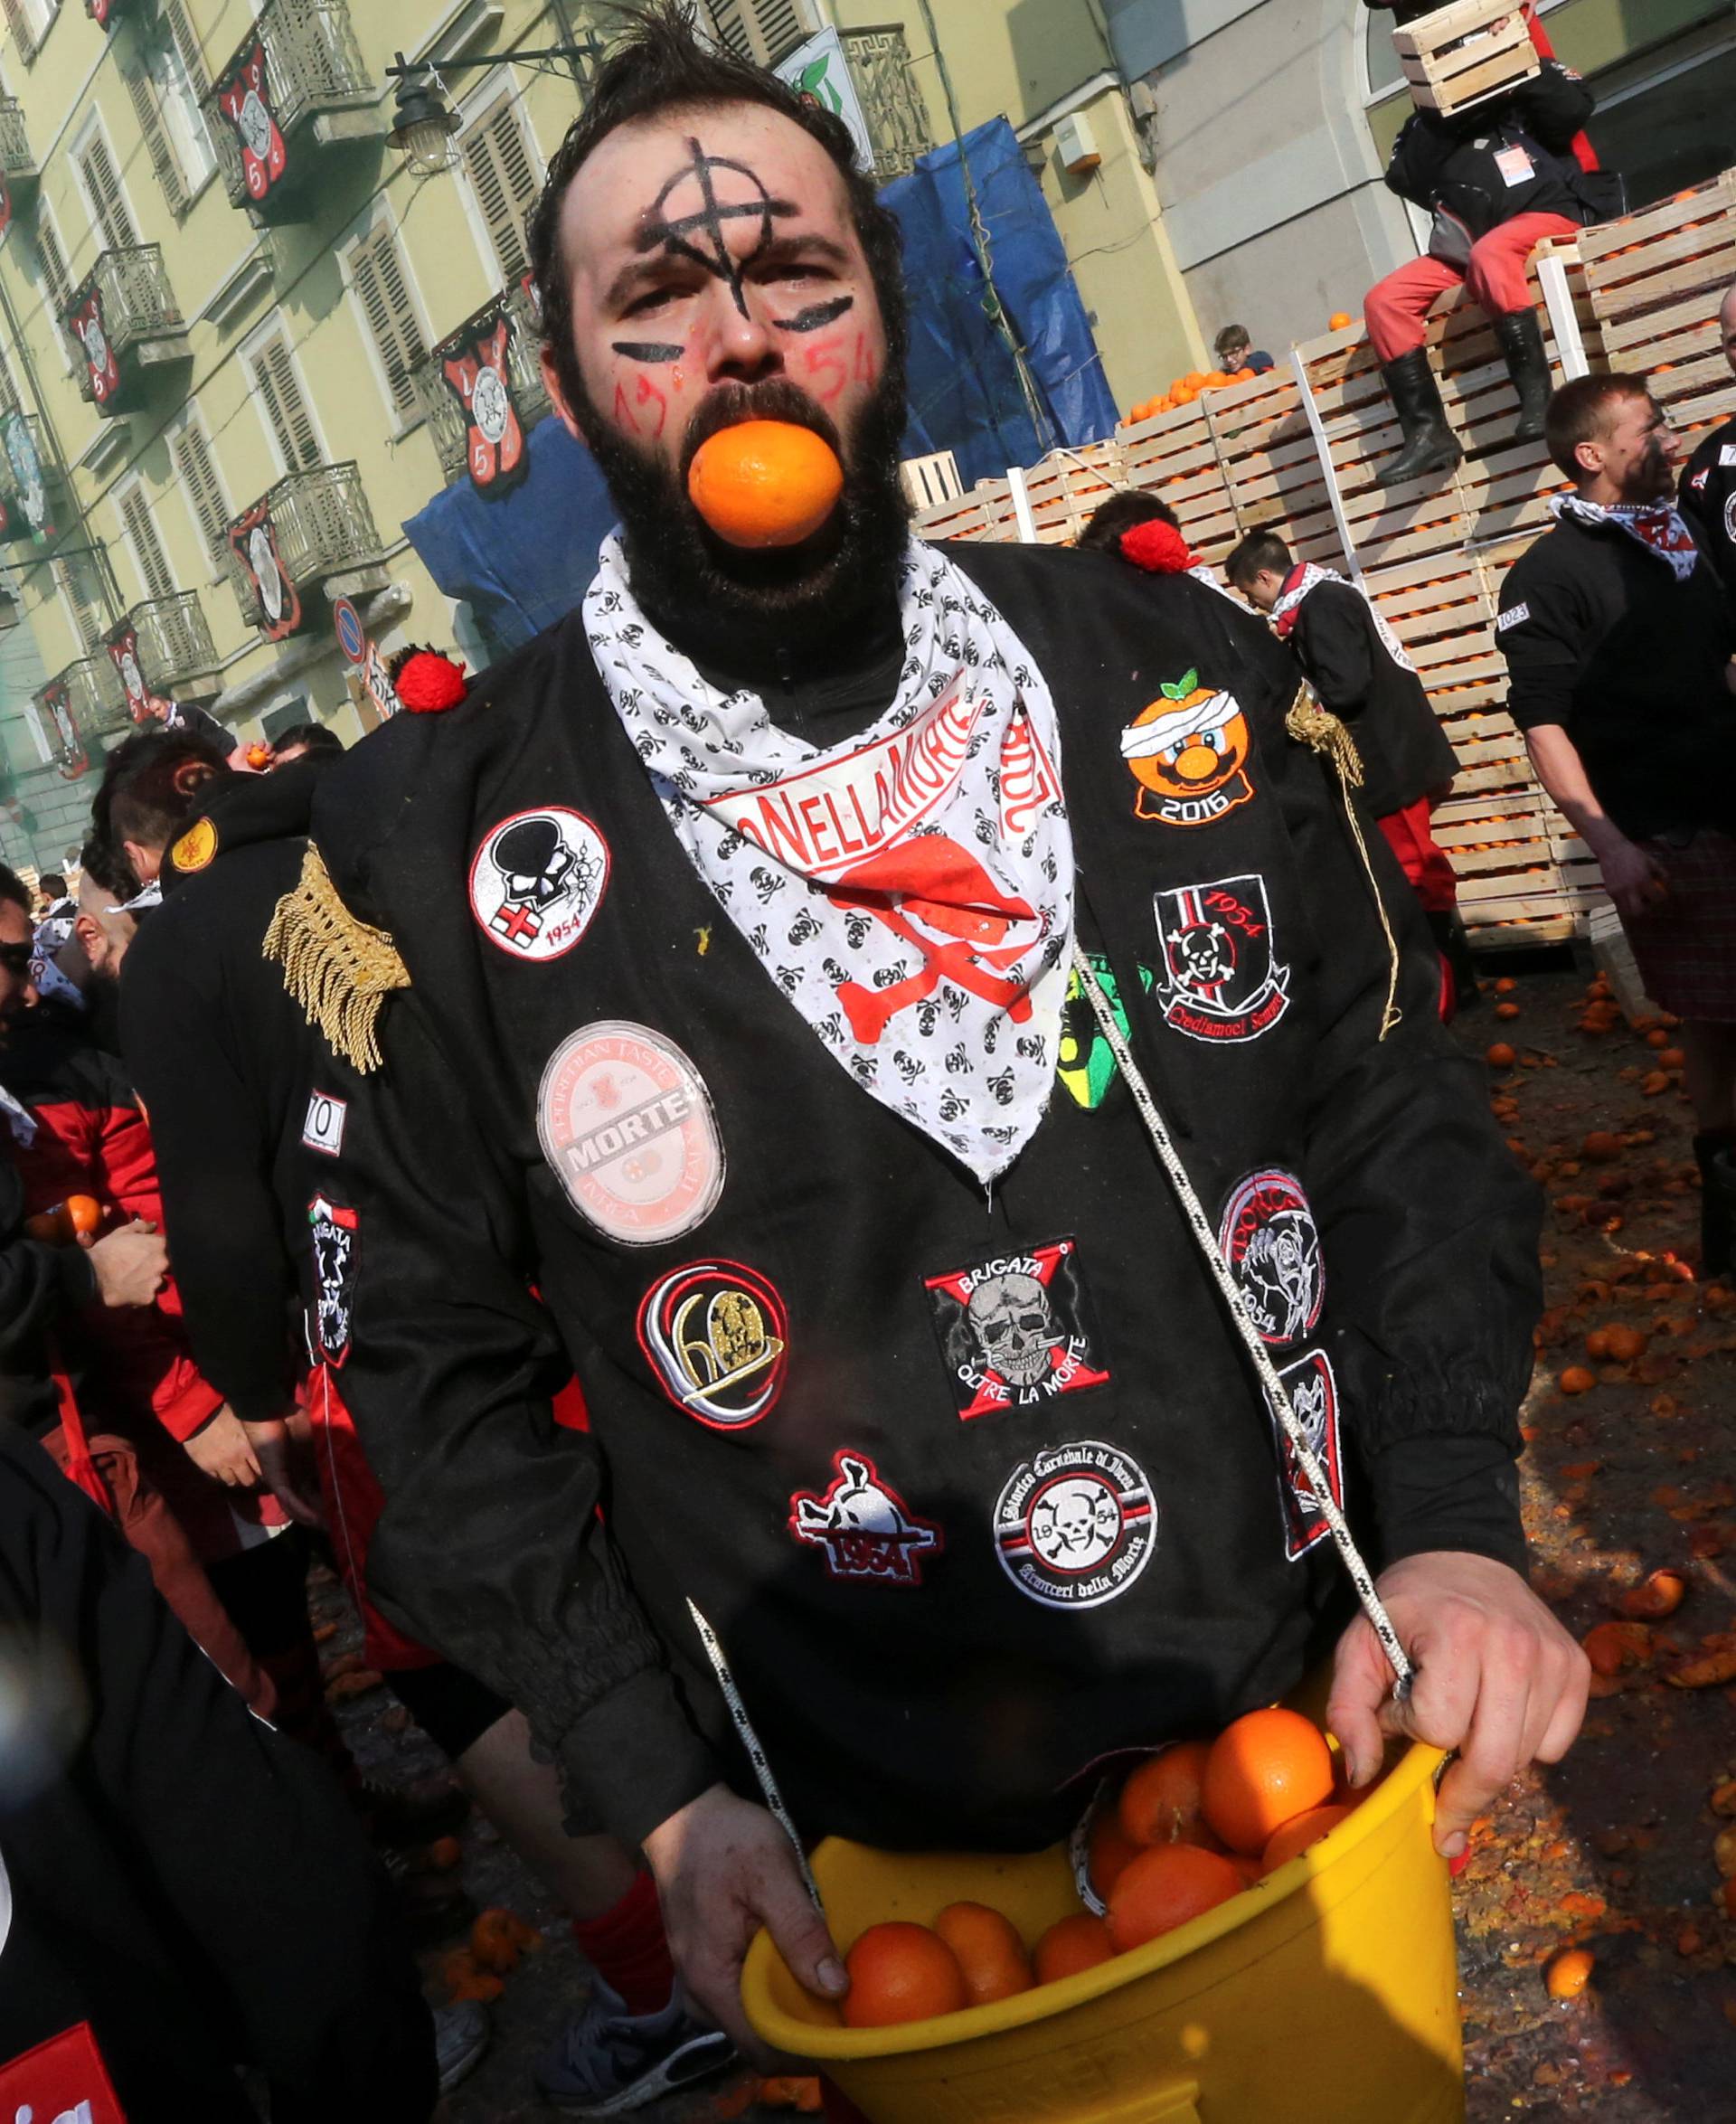 A member of a team holds an orange in his mouth during an annual carnival battle in the northern Italian town of Ivrea